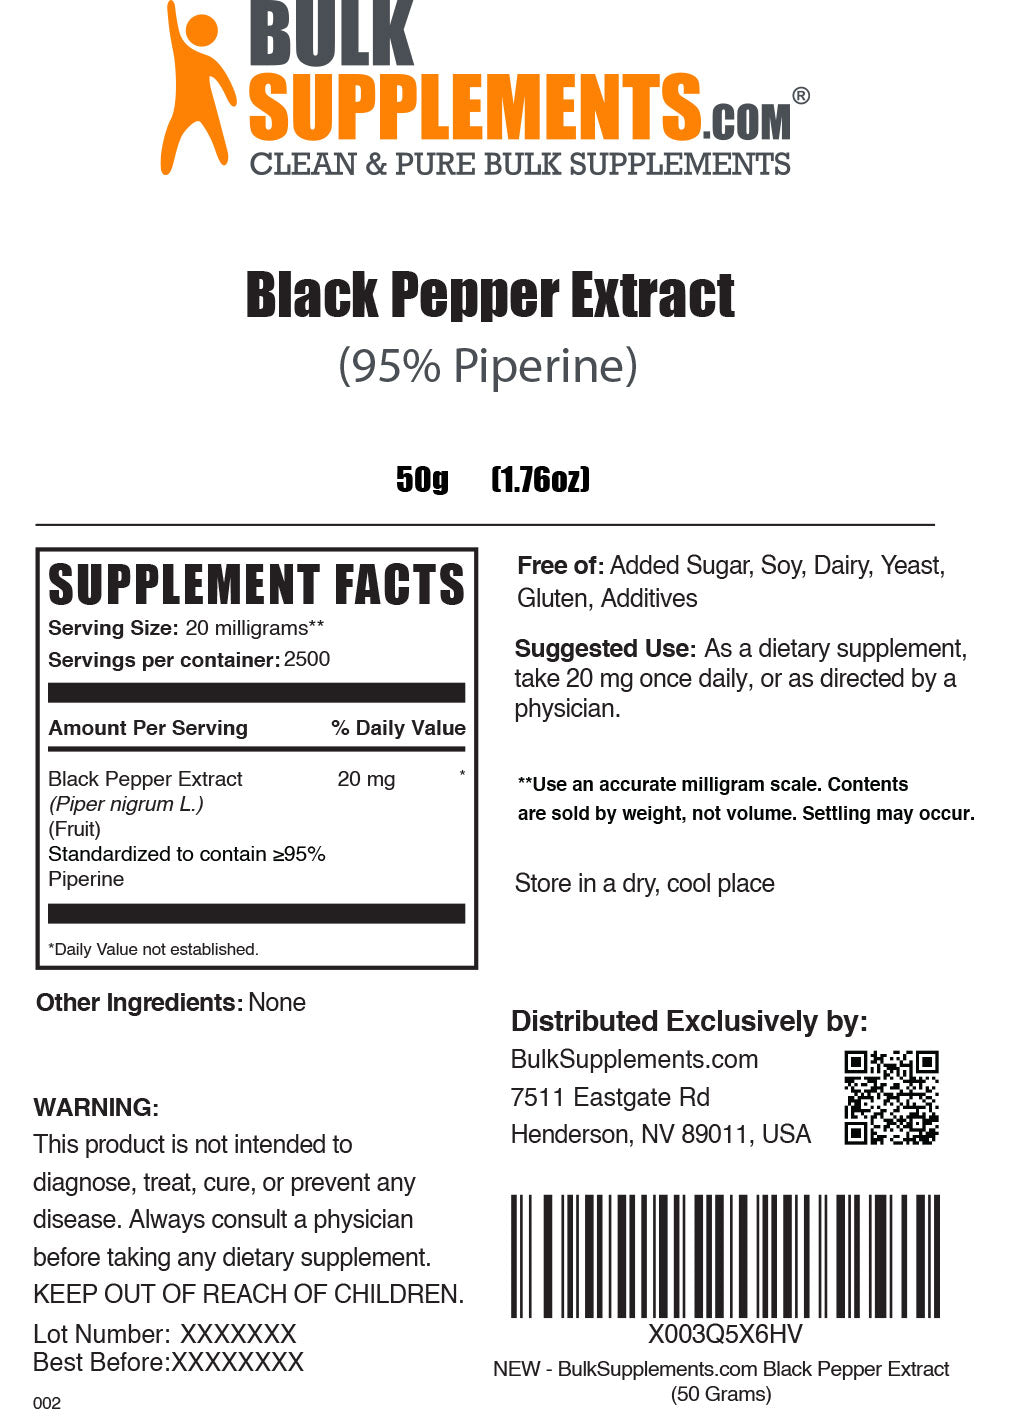 Black Pepper Extract (95% Piperine) Powder